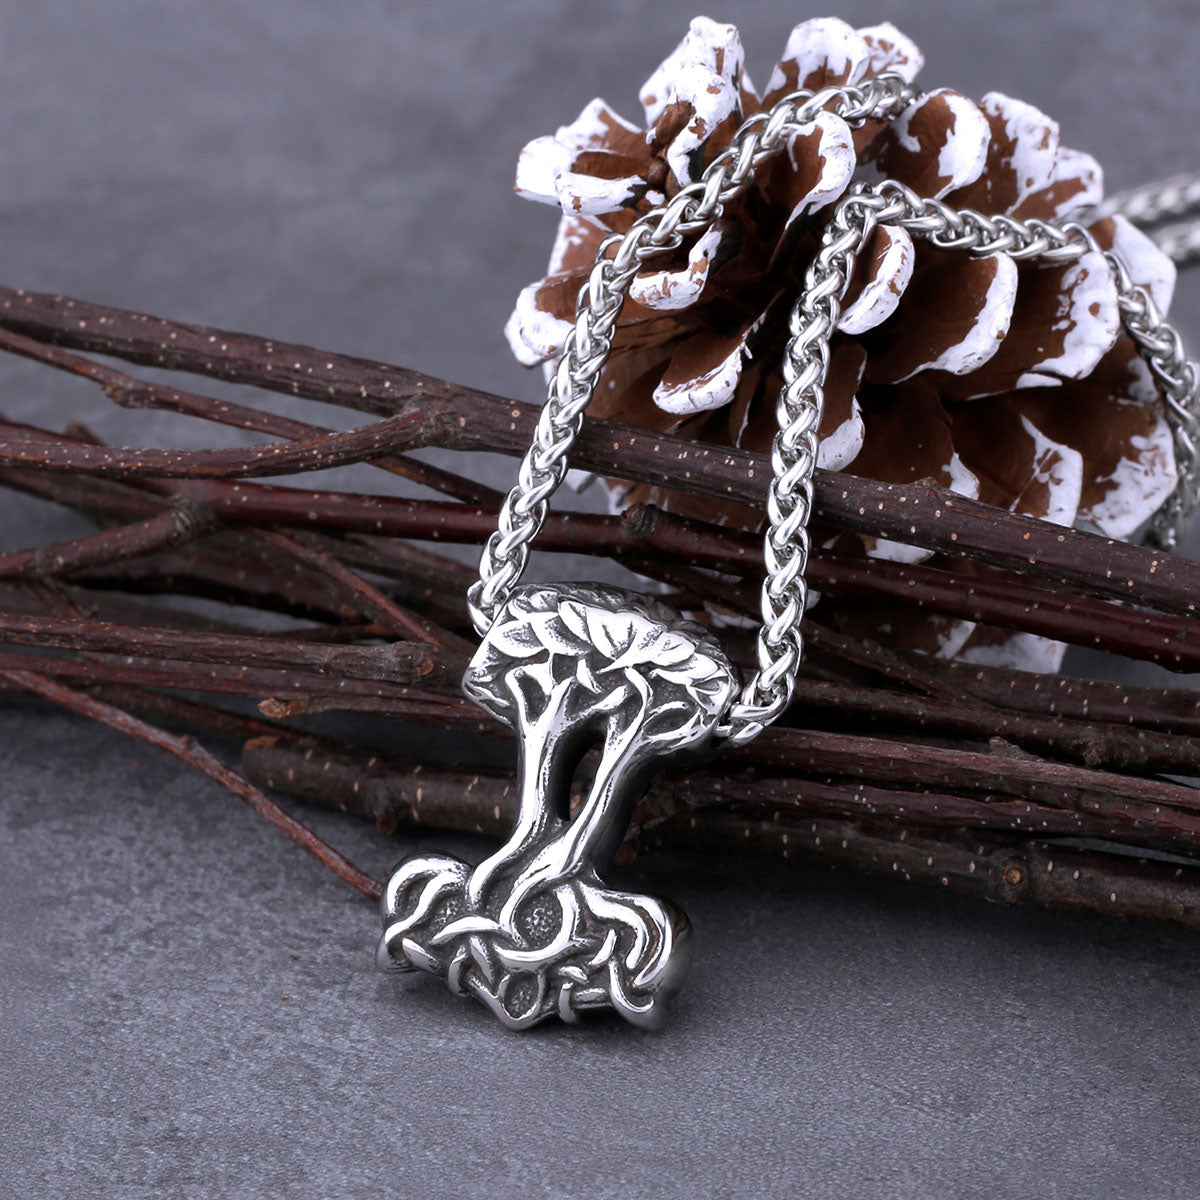 Viking Tree of Life Rune Necklace Men's Stainless Steel Thor Hammer Fashion Pendant